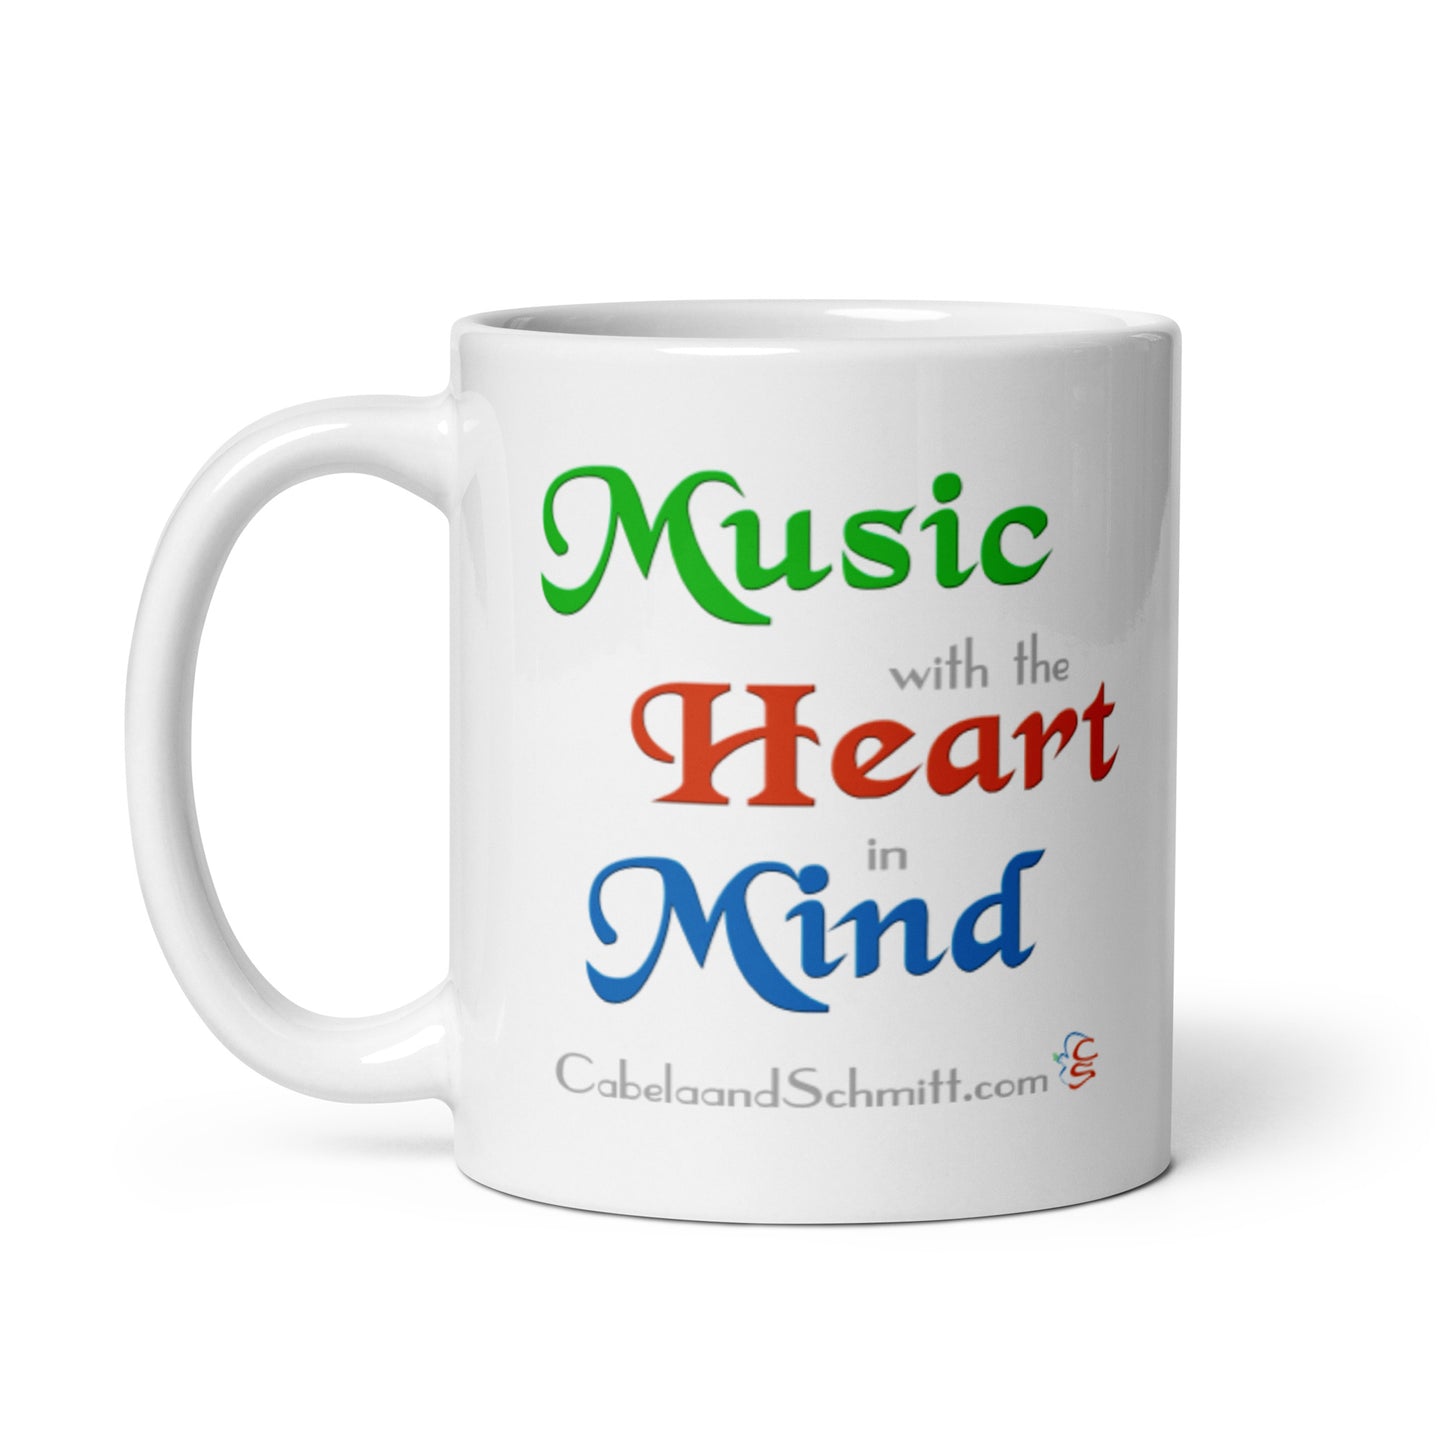 "Music With the Heart In Mind" White glossy mug